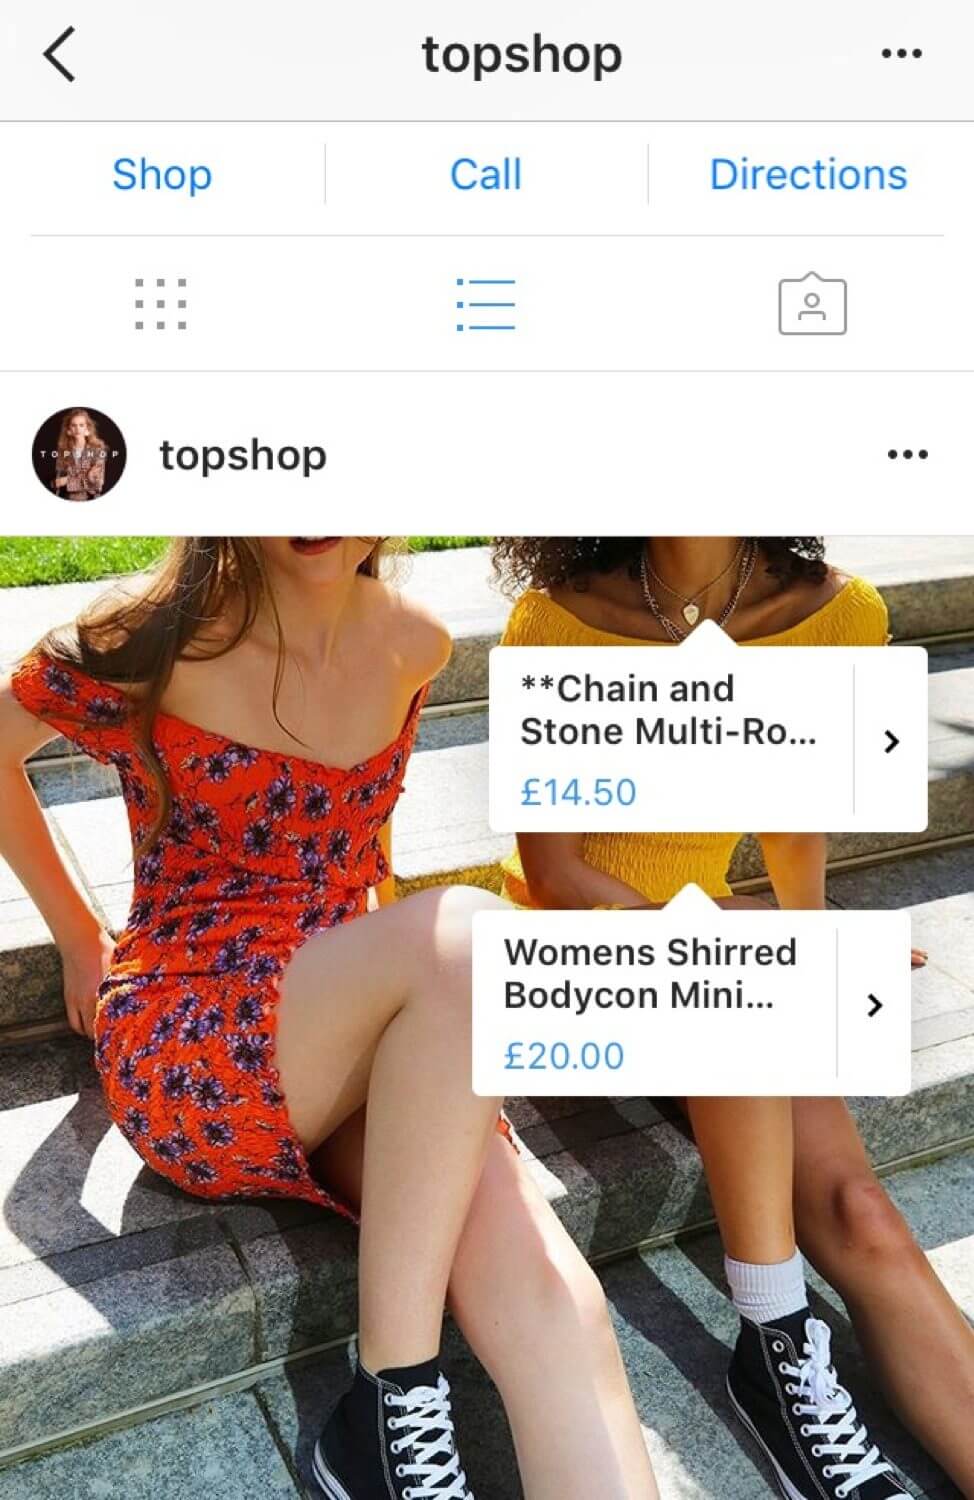 Shoppable posts in Instagram